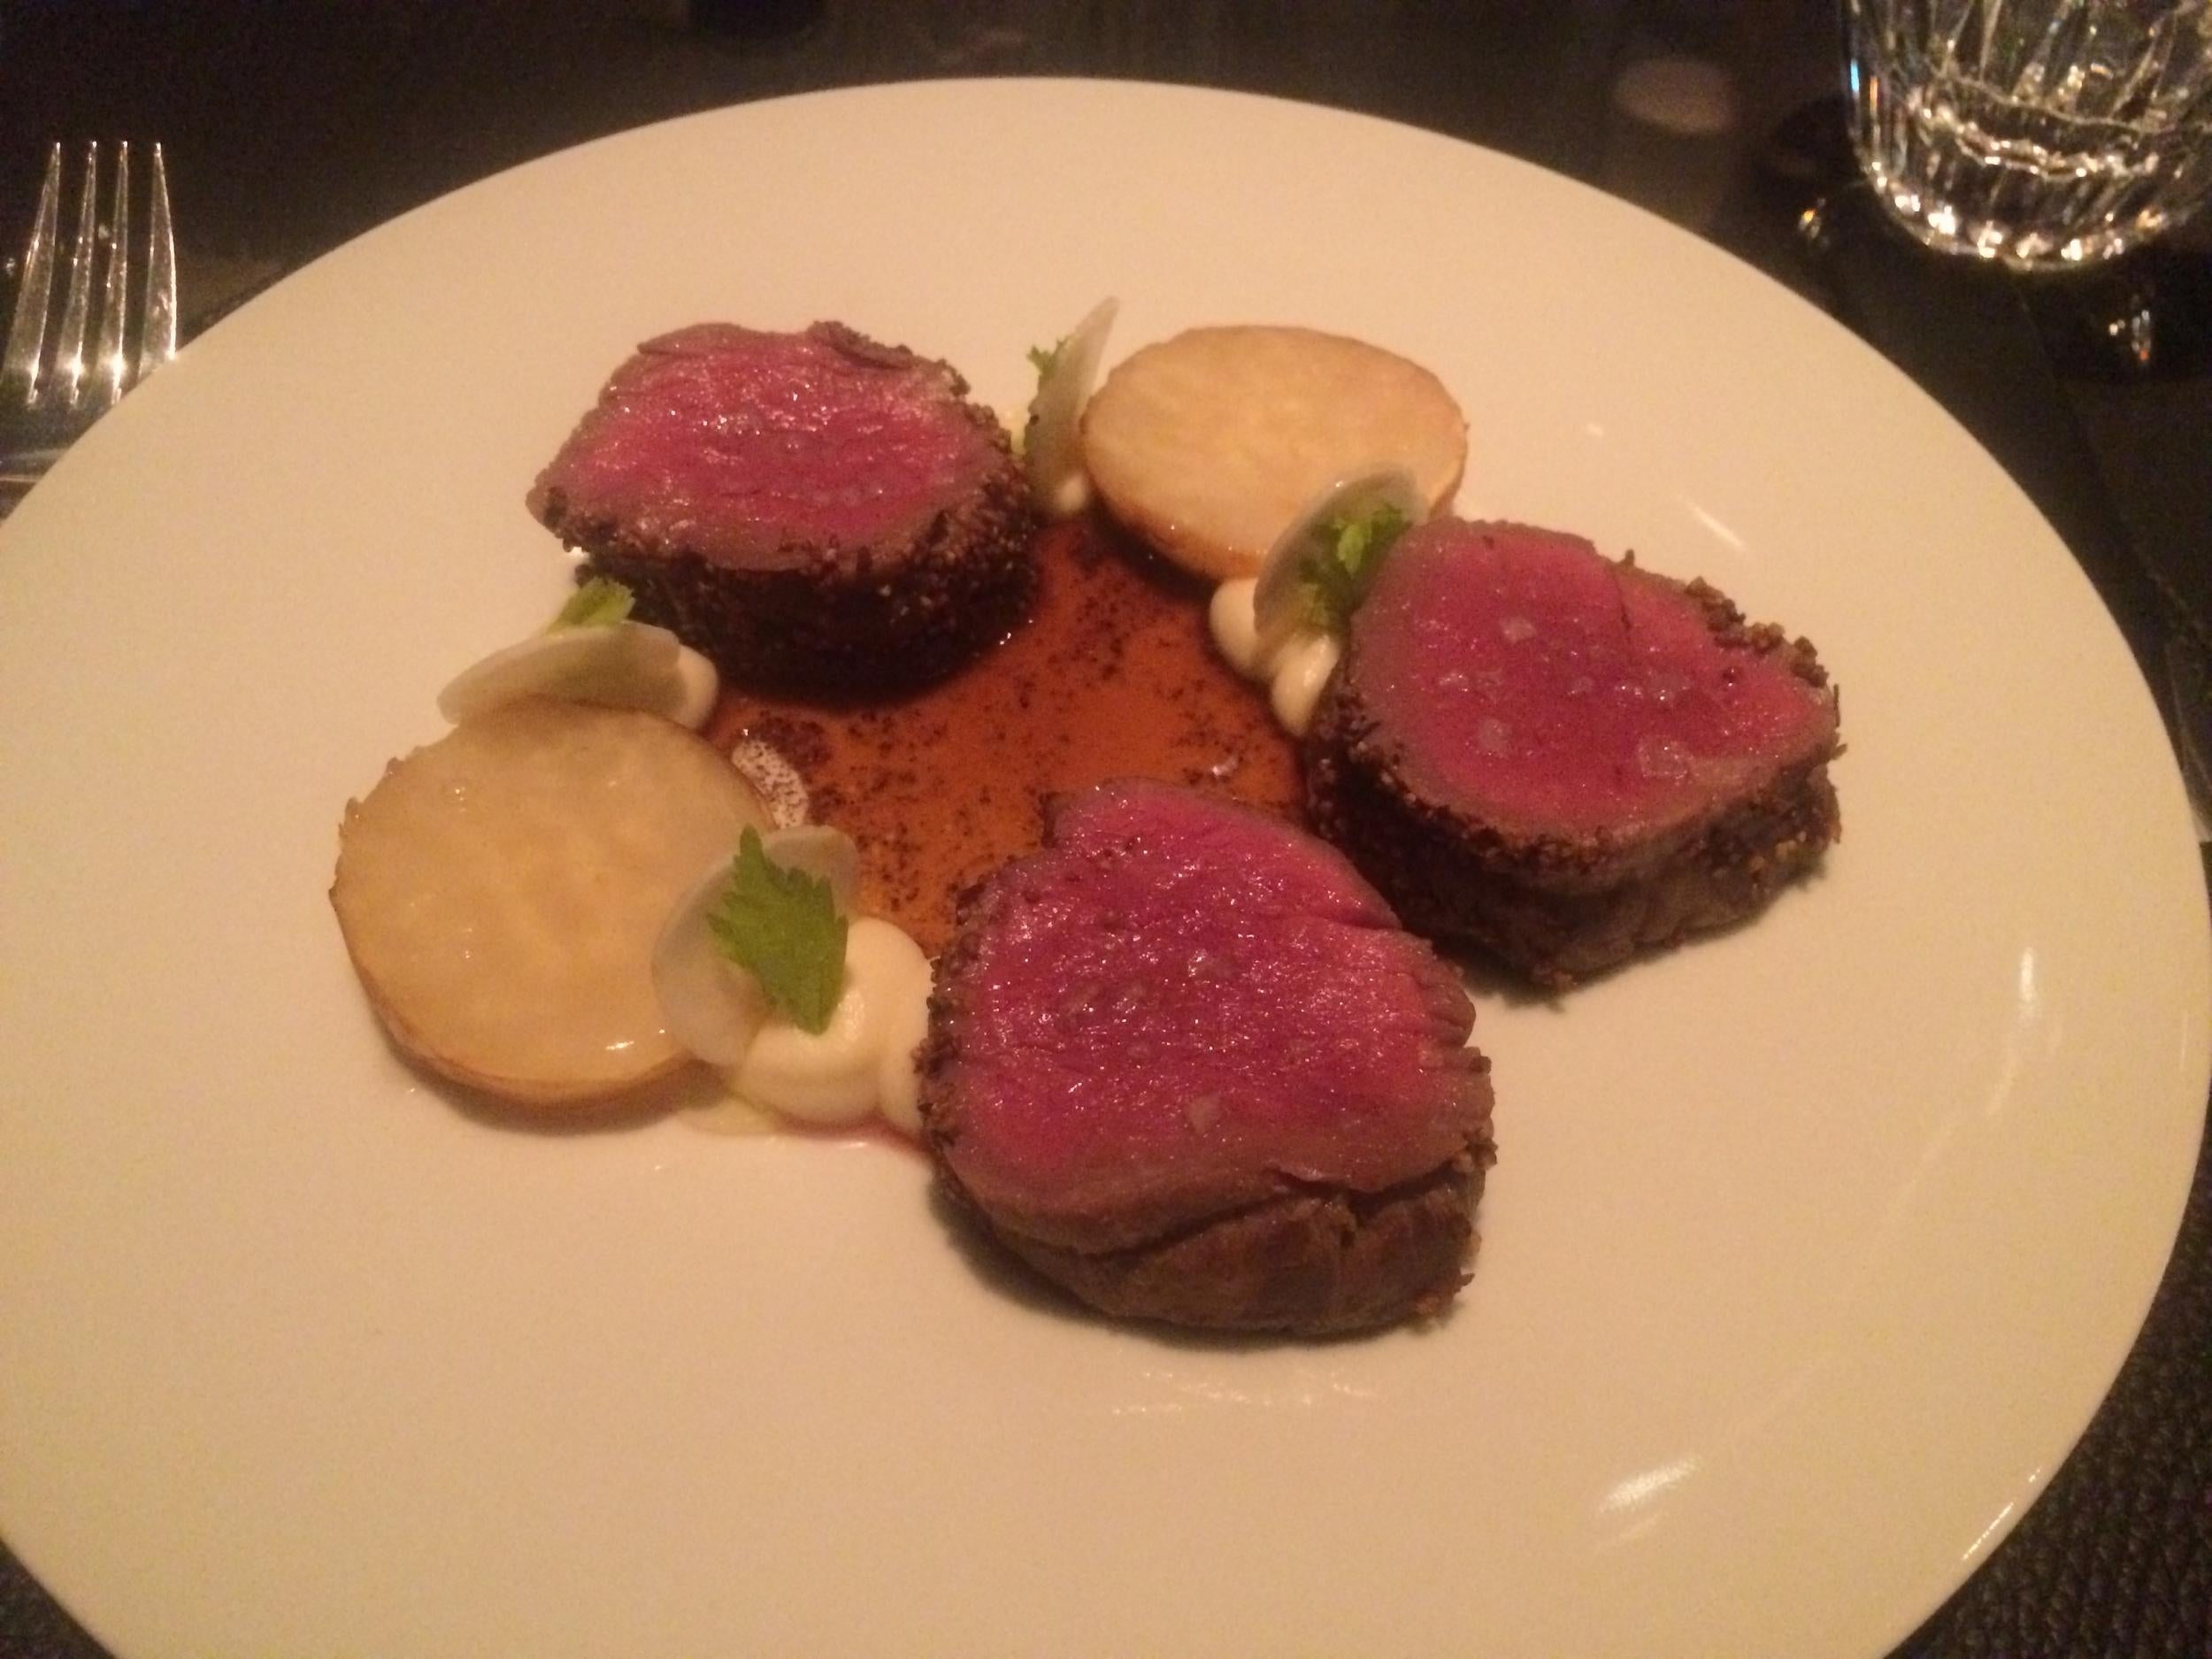 This dish carries a price tag of £41 at Le Dame De Pic